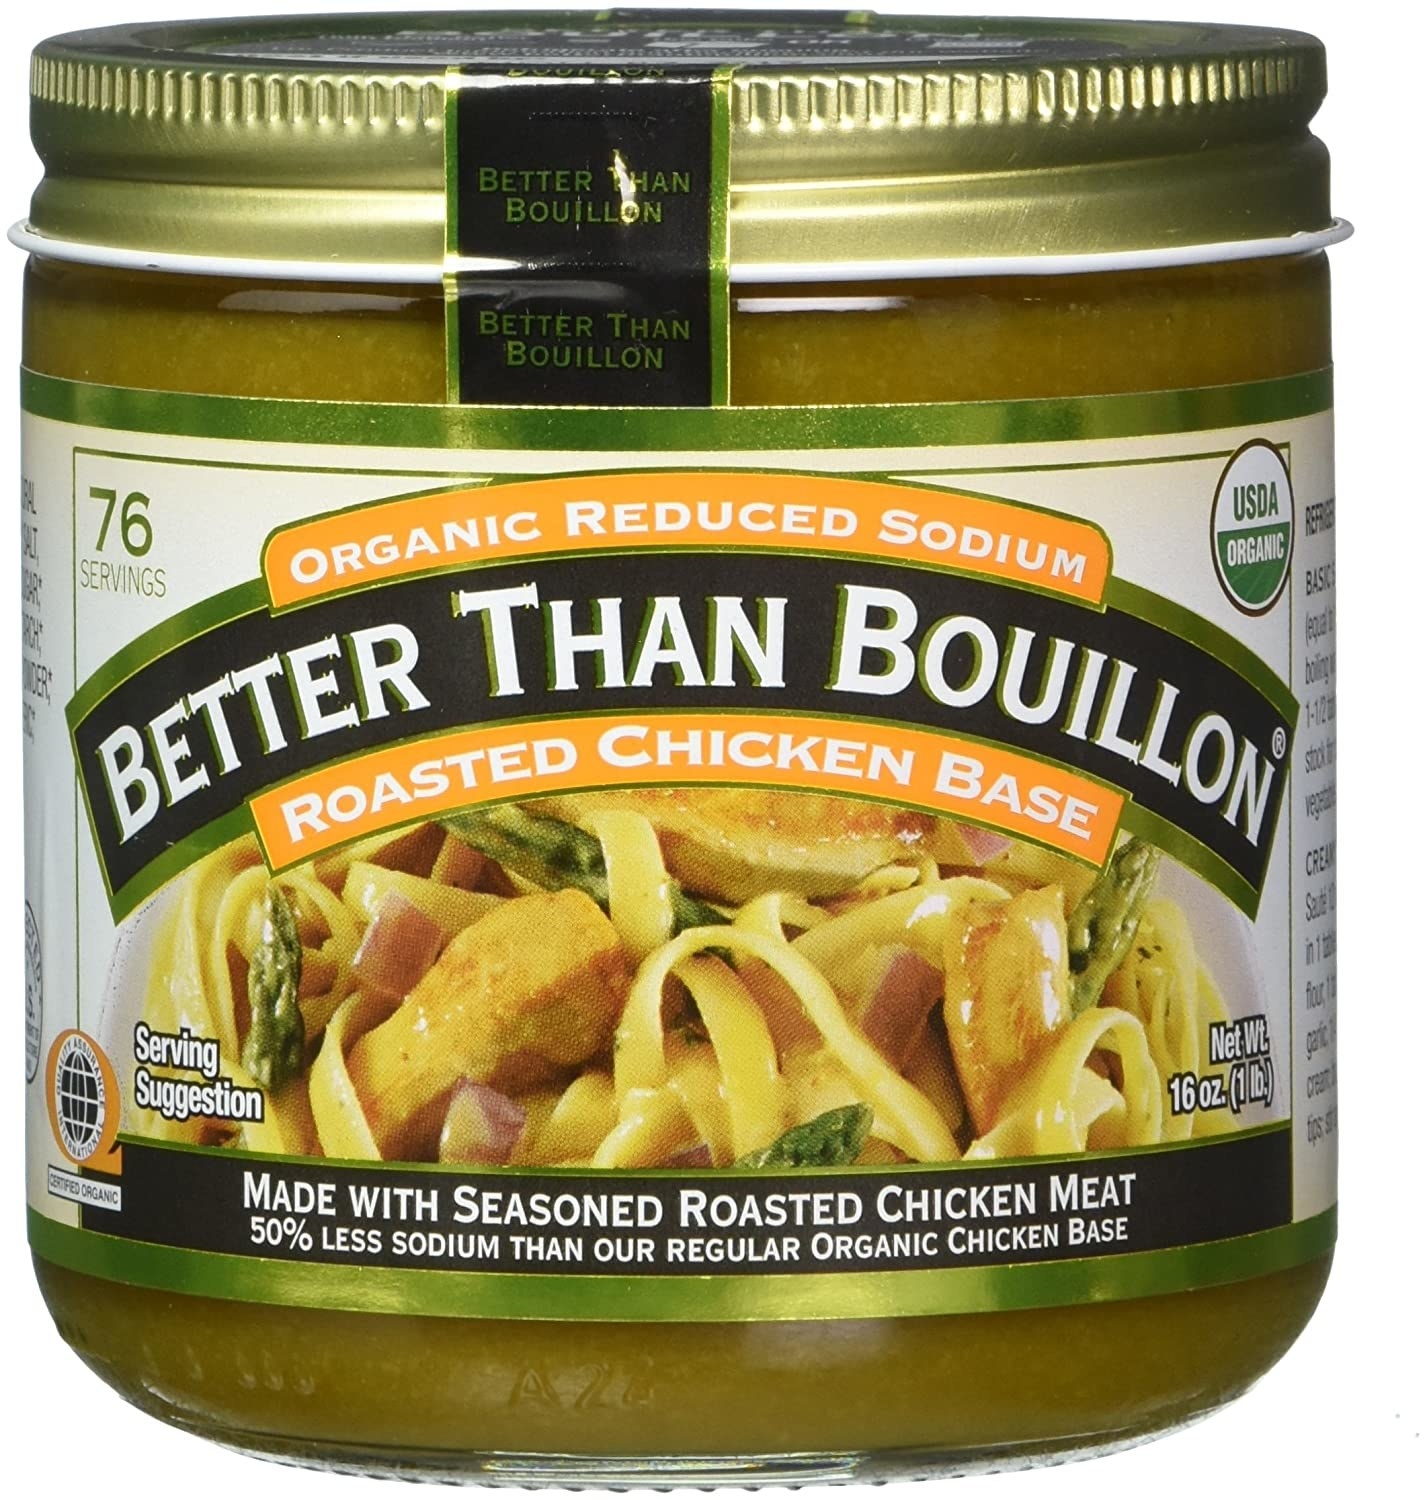 Promotional image for Better Than Bouillon